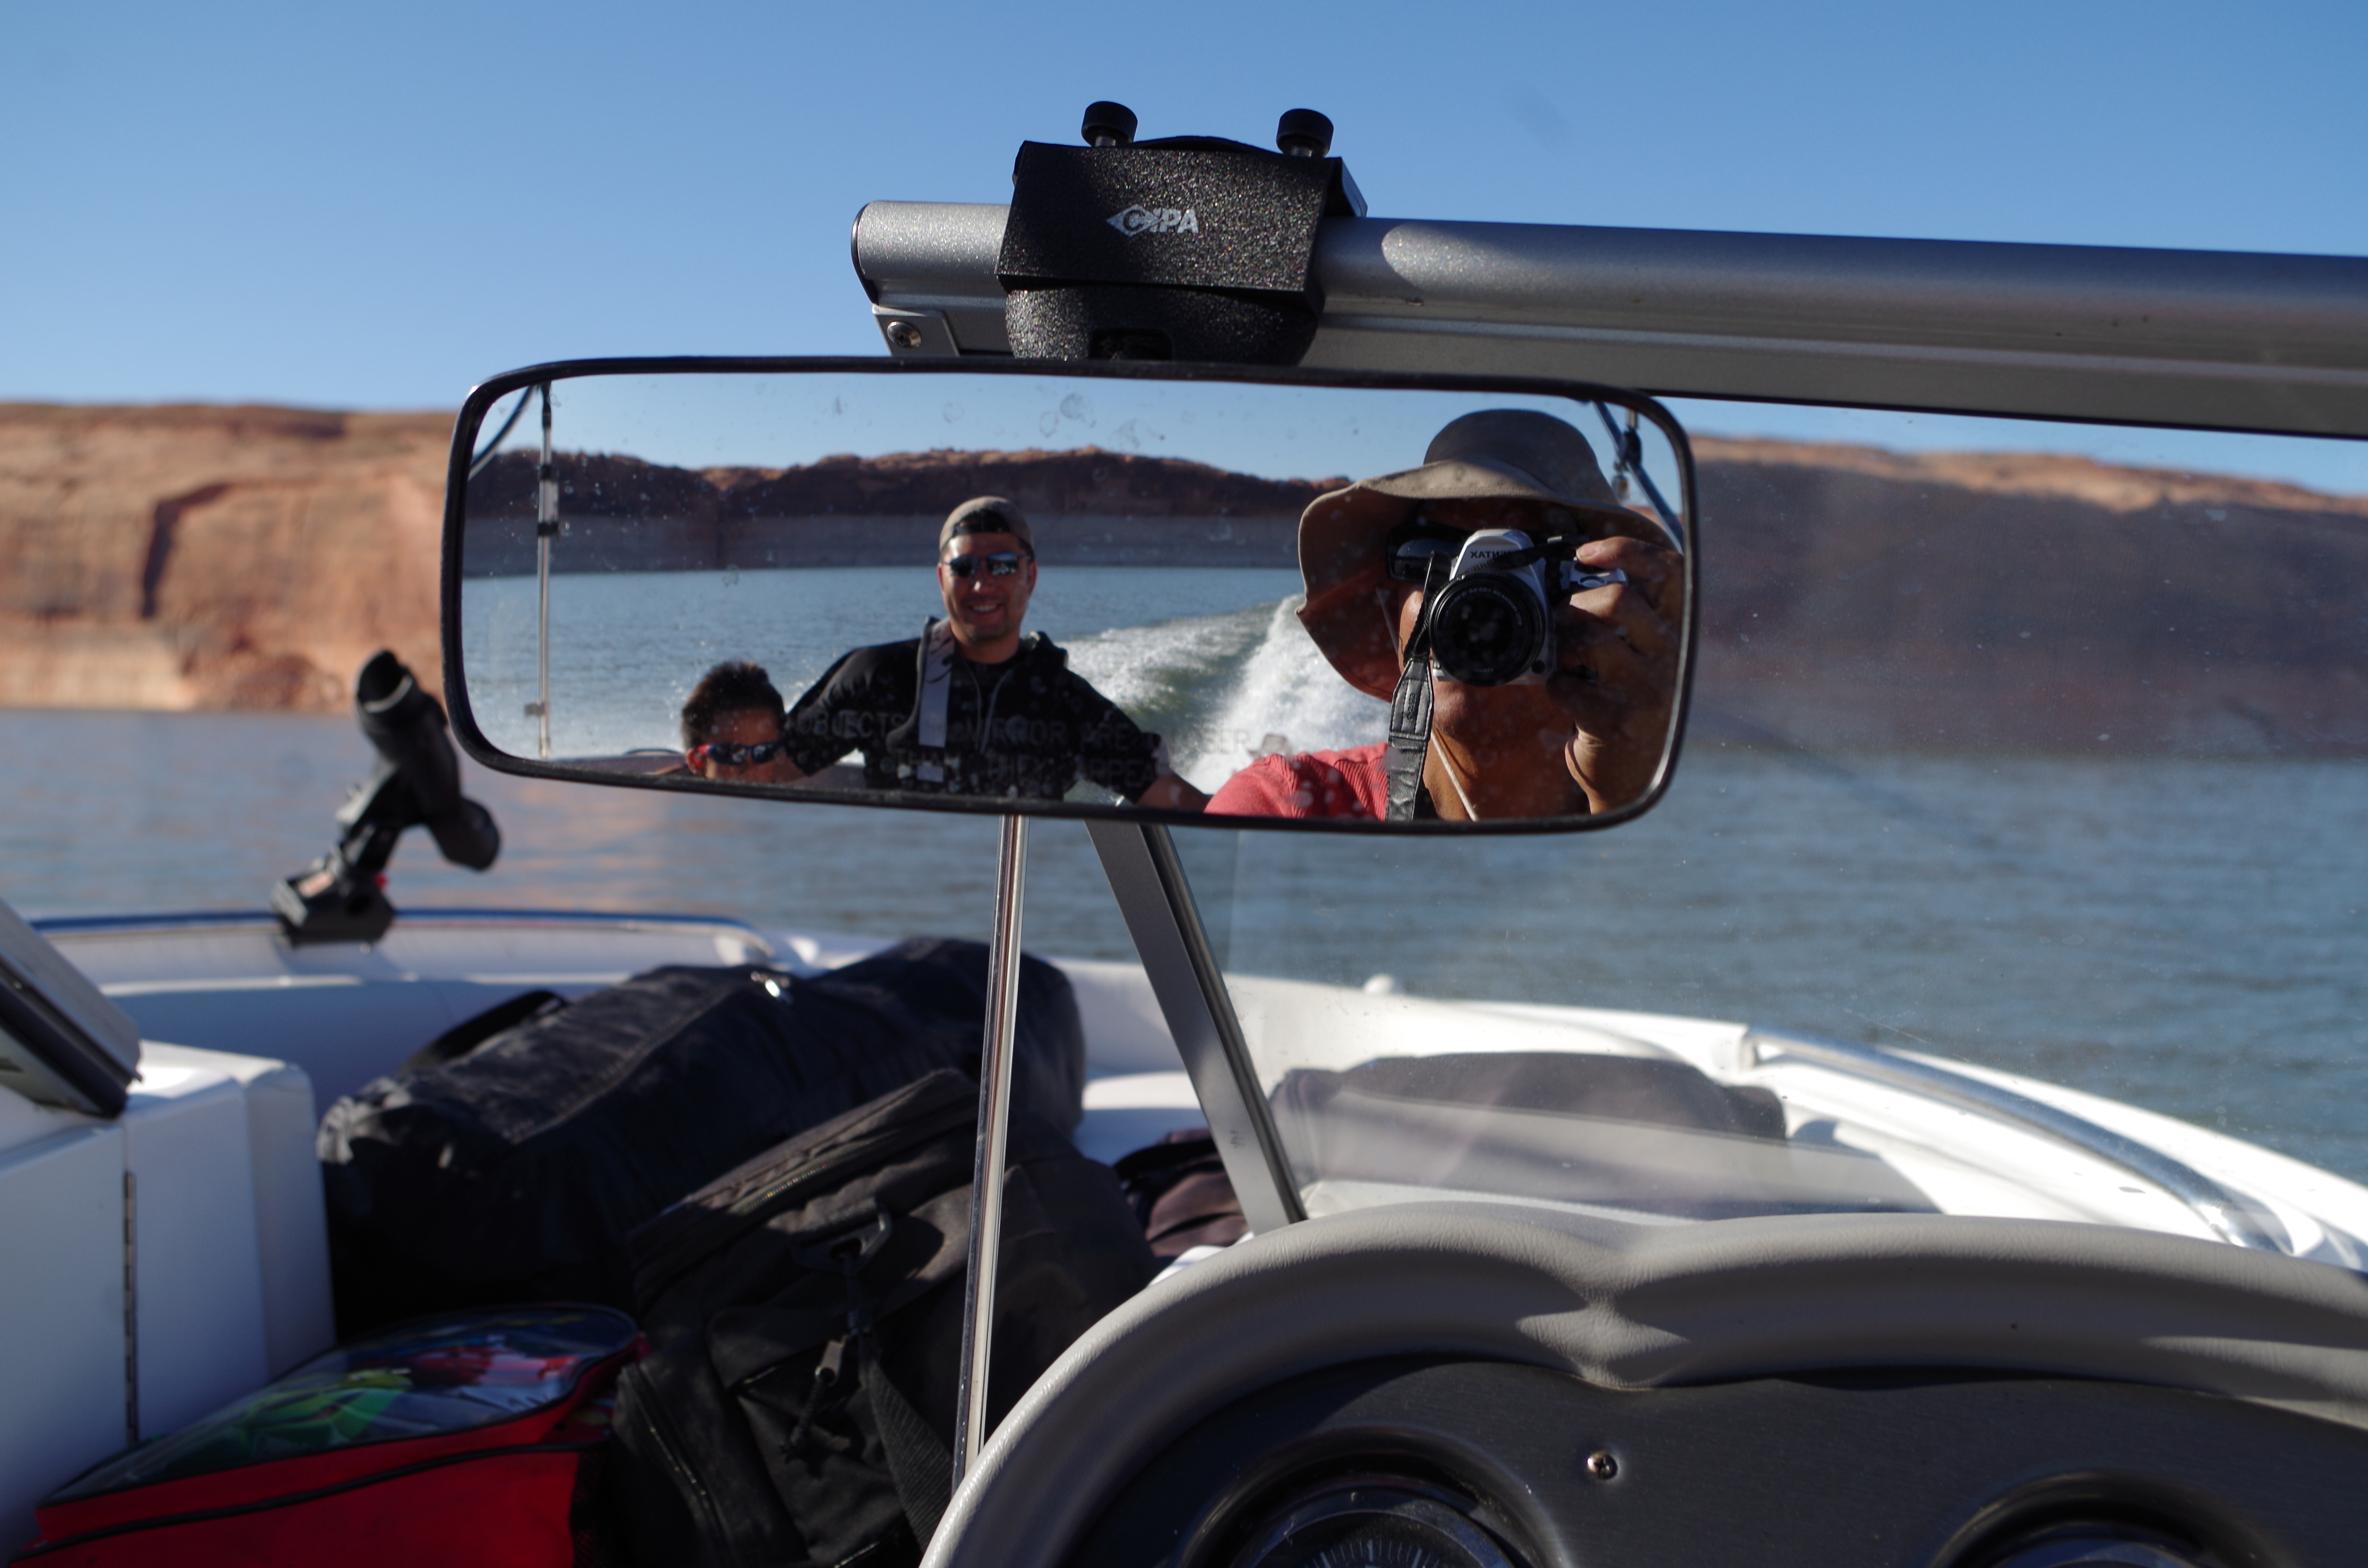 Loaded with gear leaving Lake Powell